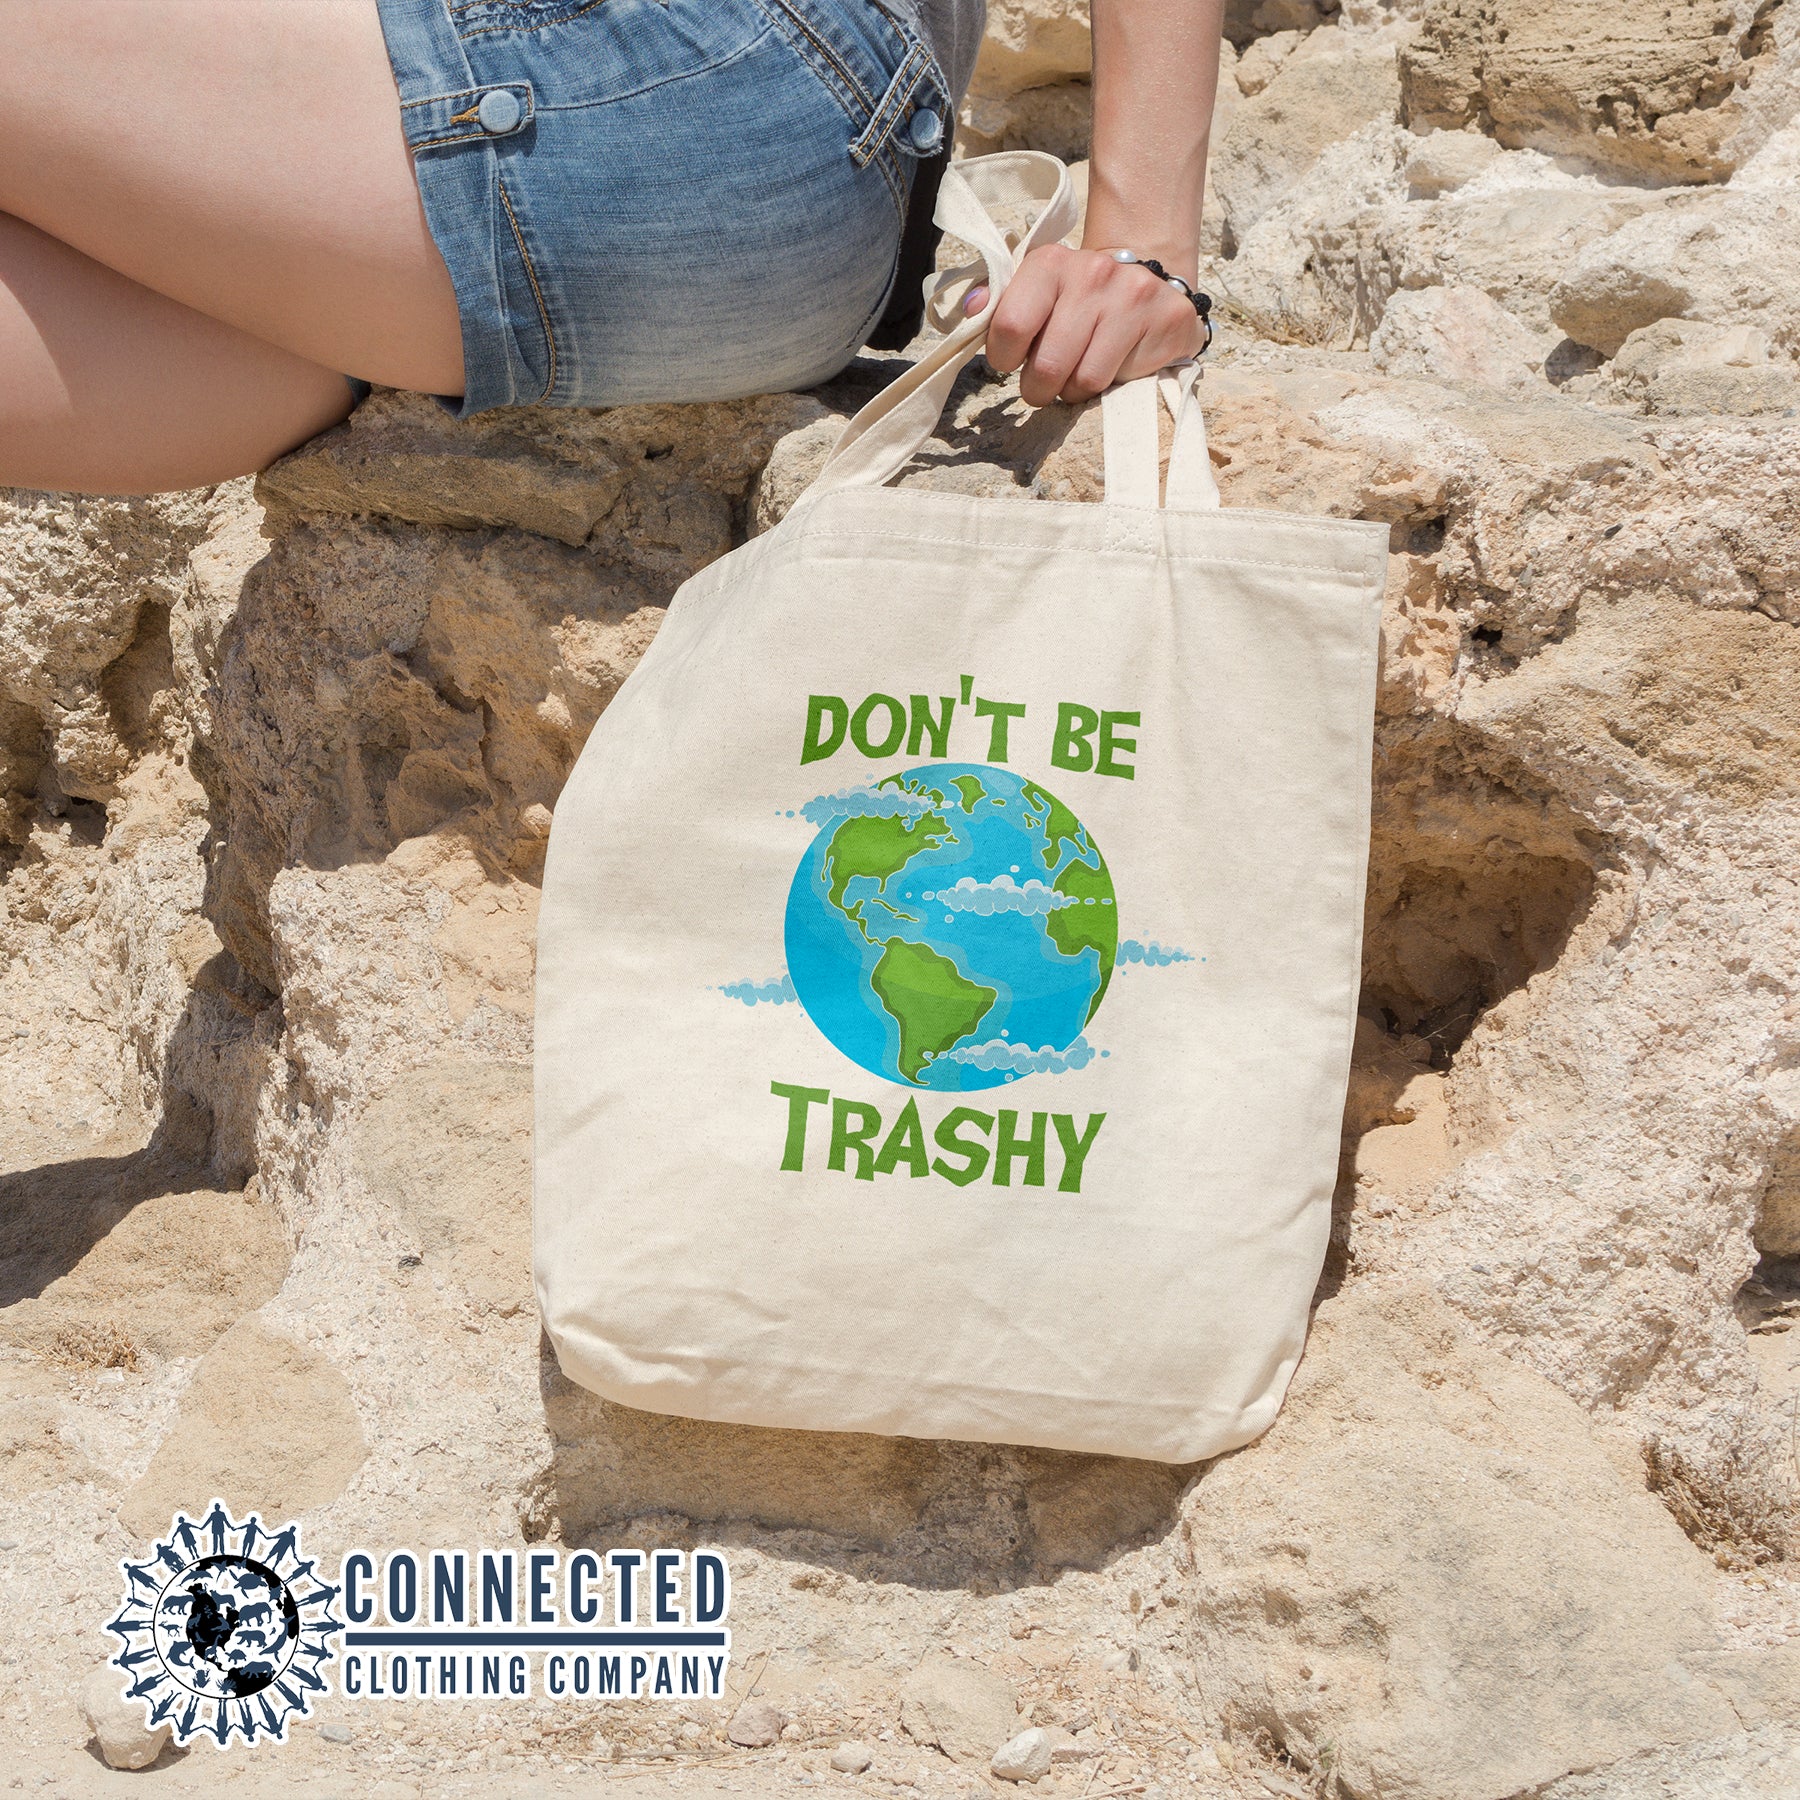 Don't Be Trashy Tote Bag - Connected Clothing Company - 10% of proceeds donated to mission blue ocean conservation